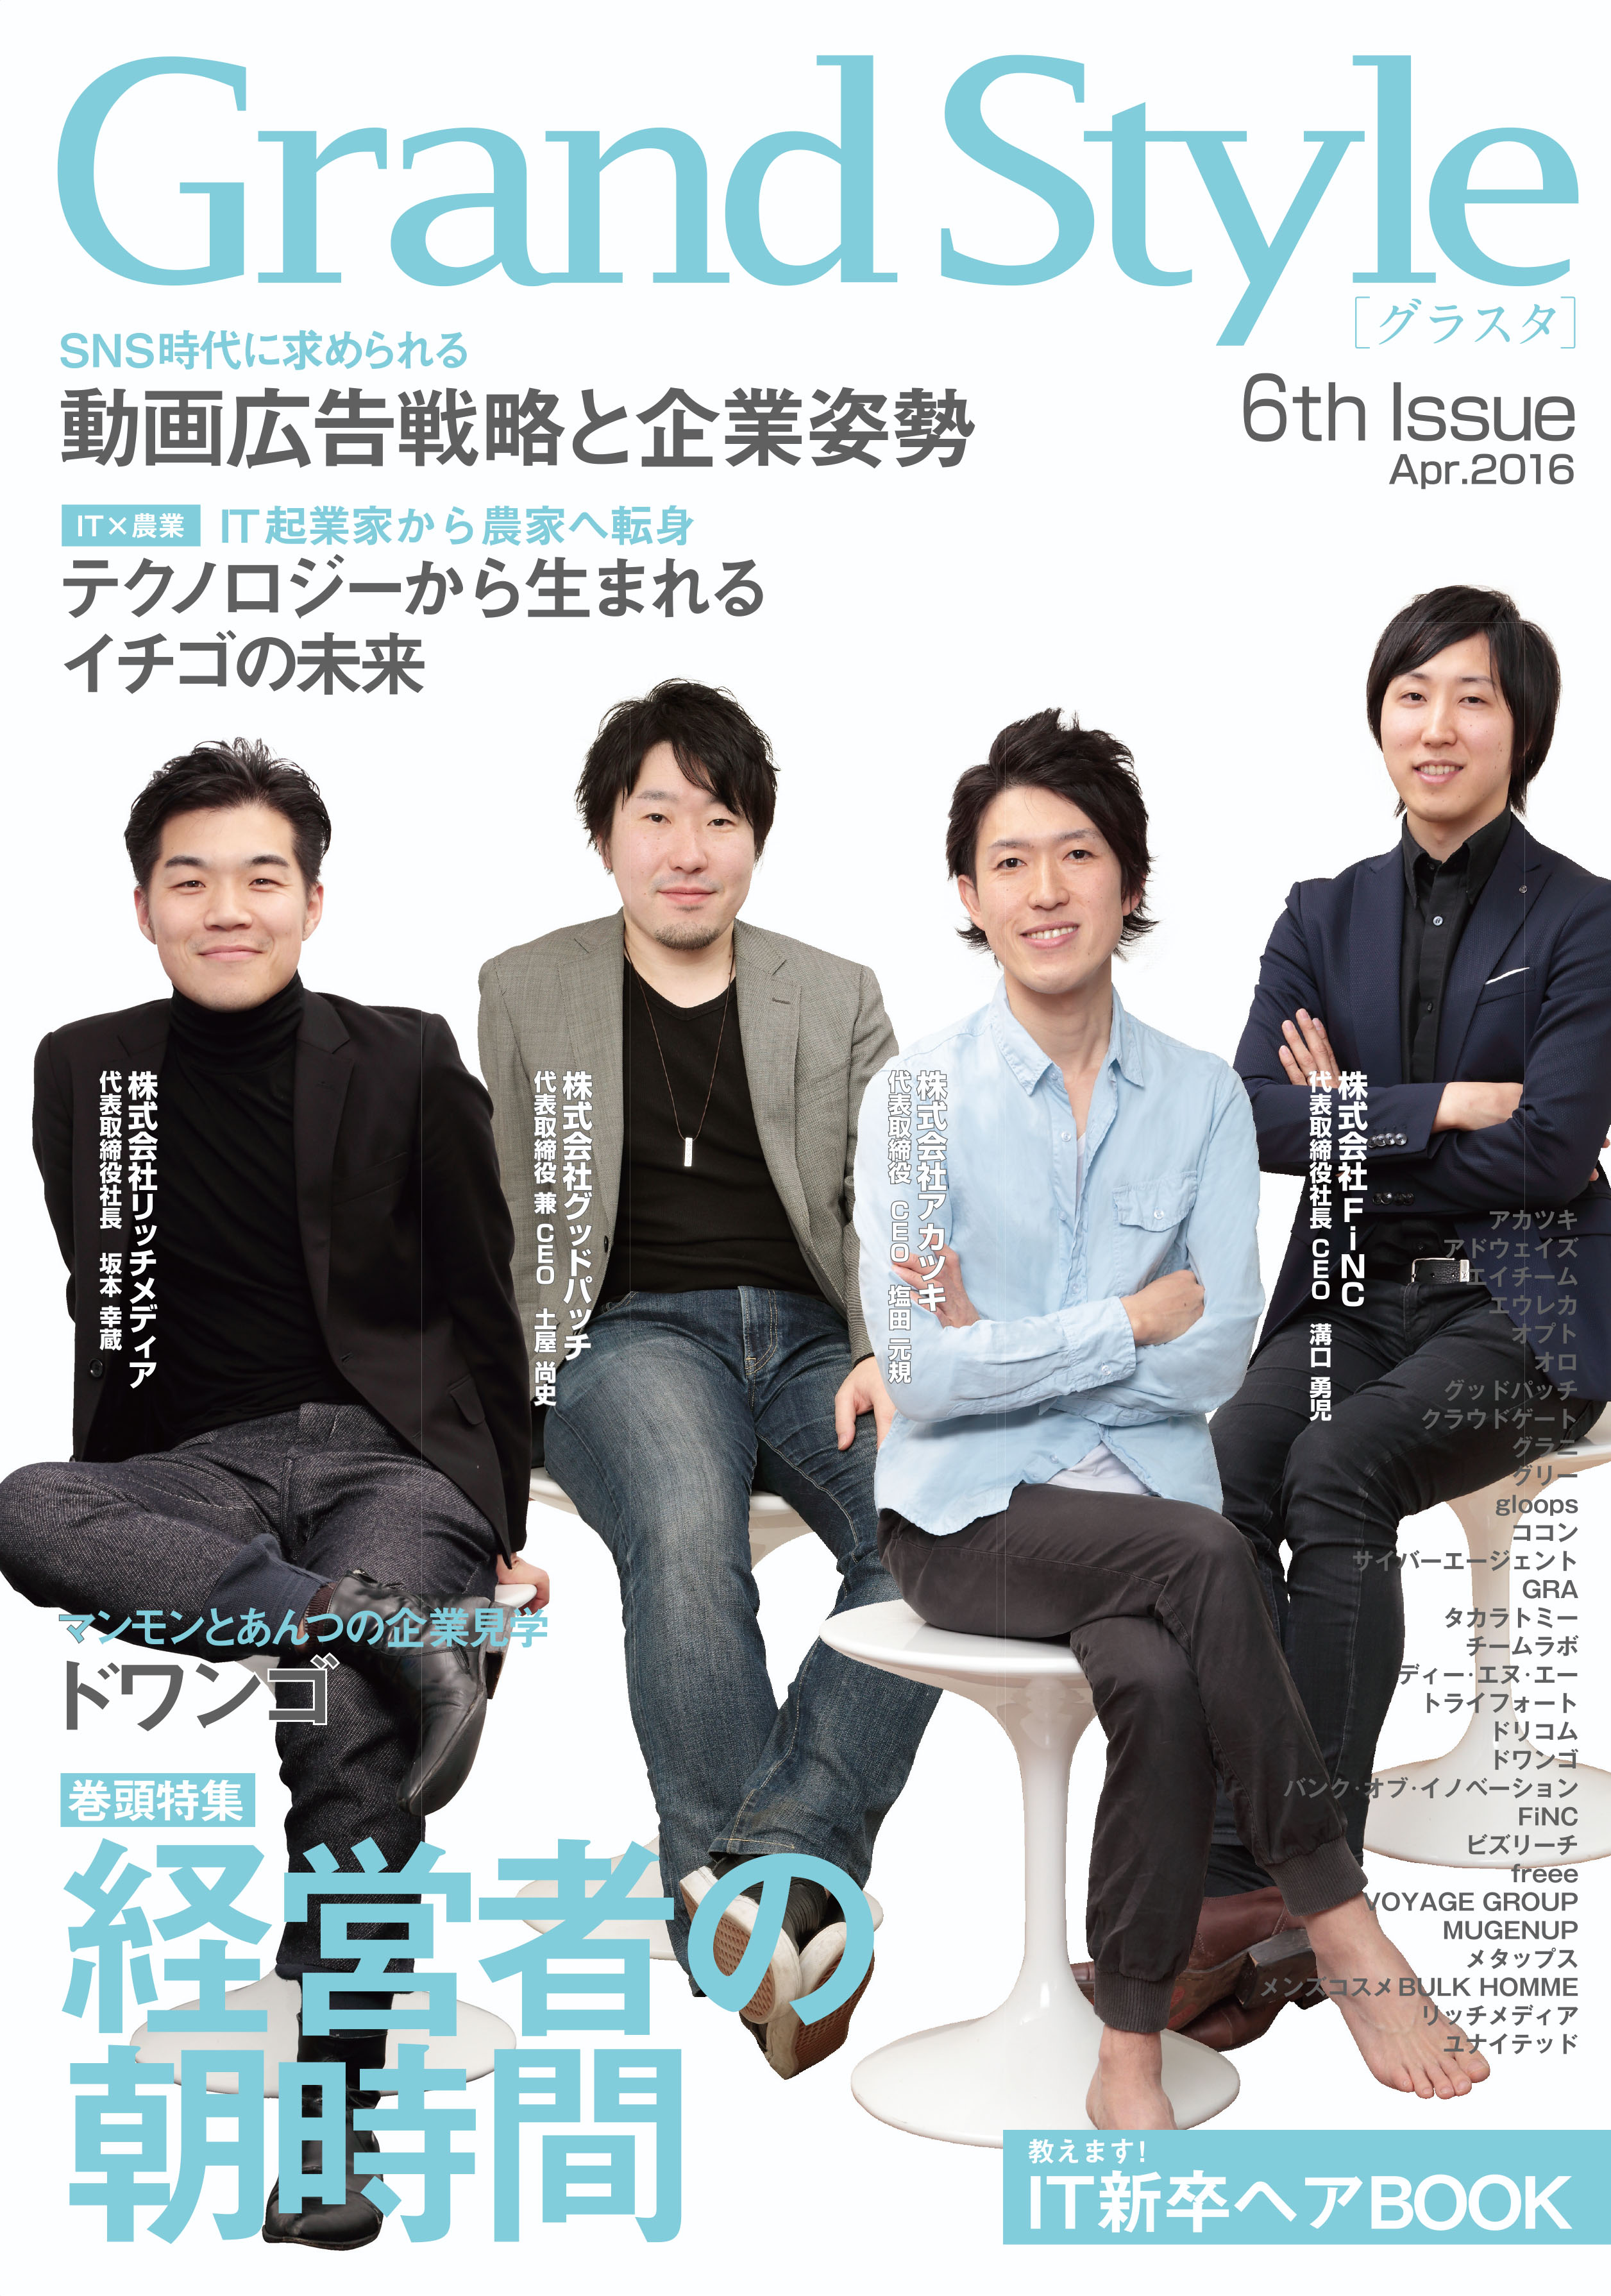 『Grand Style』6th Issue